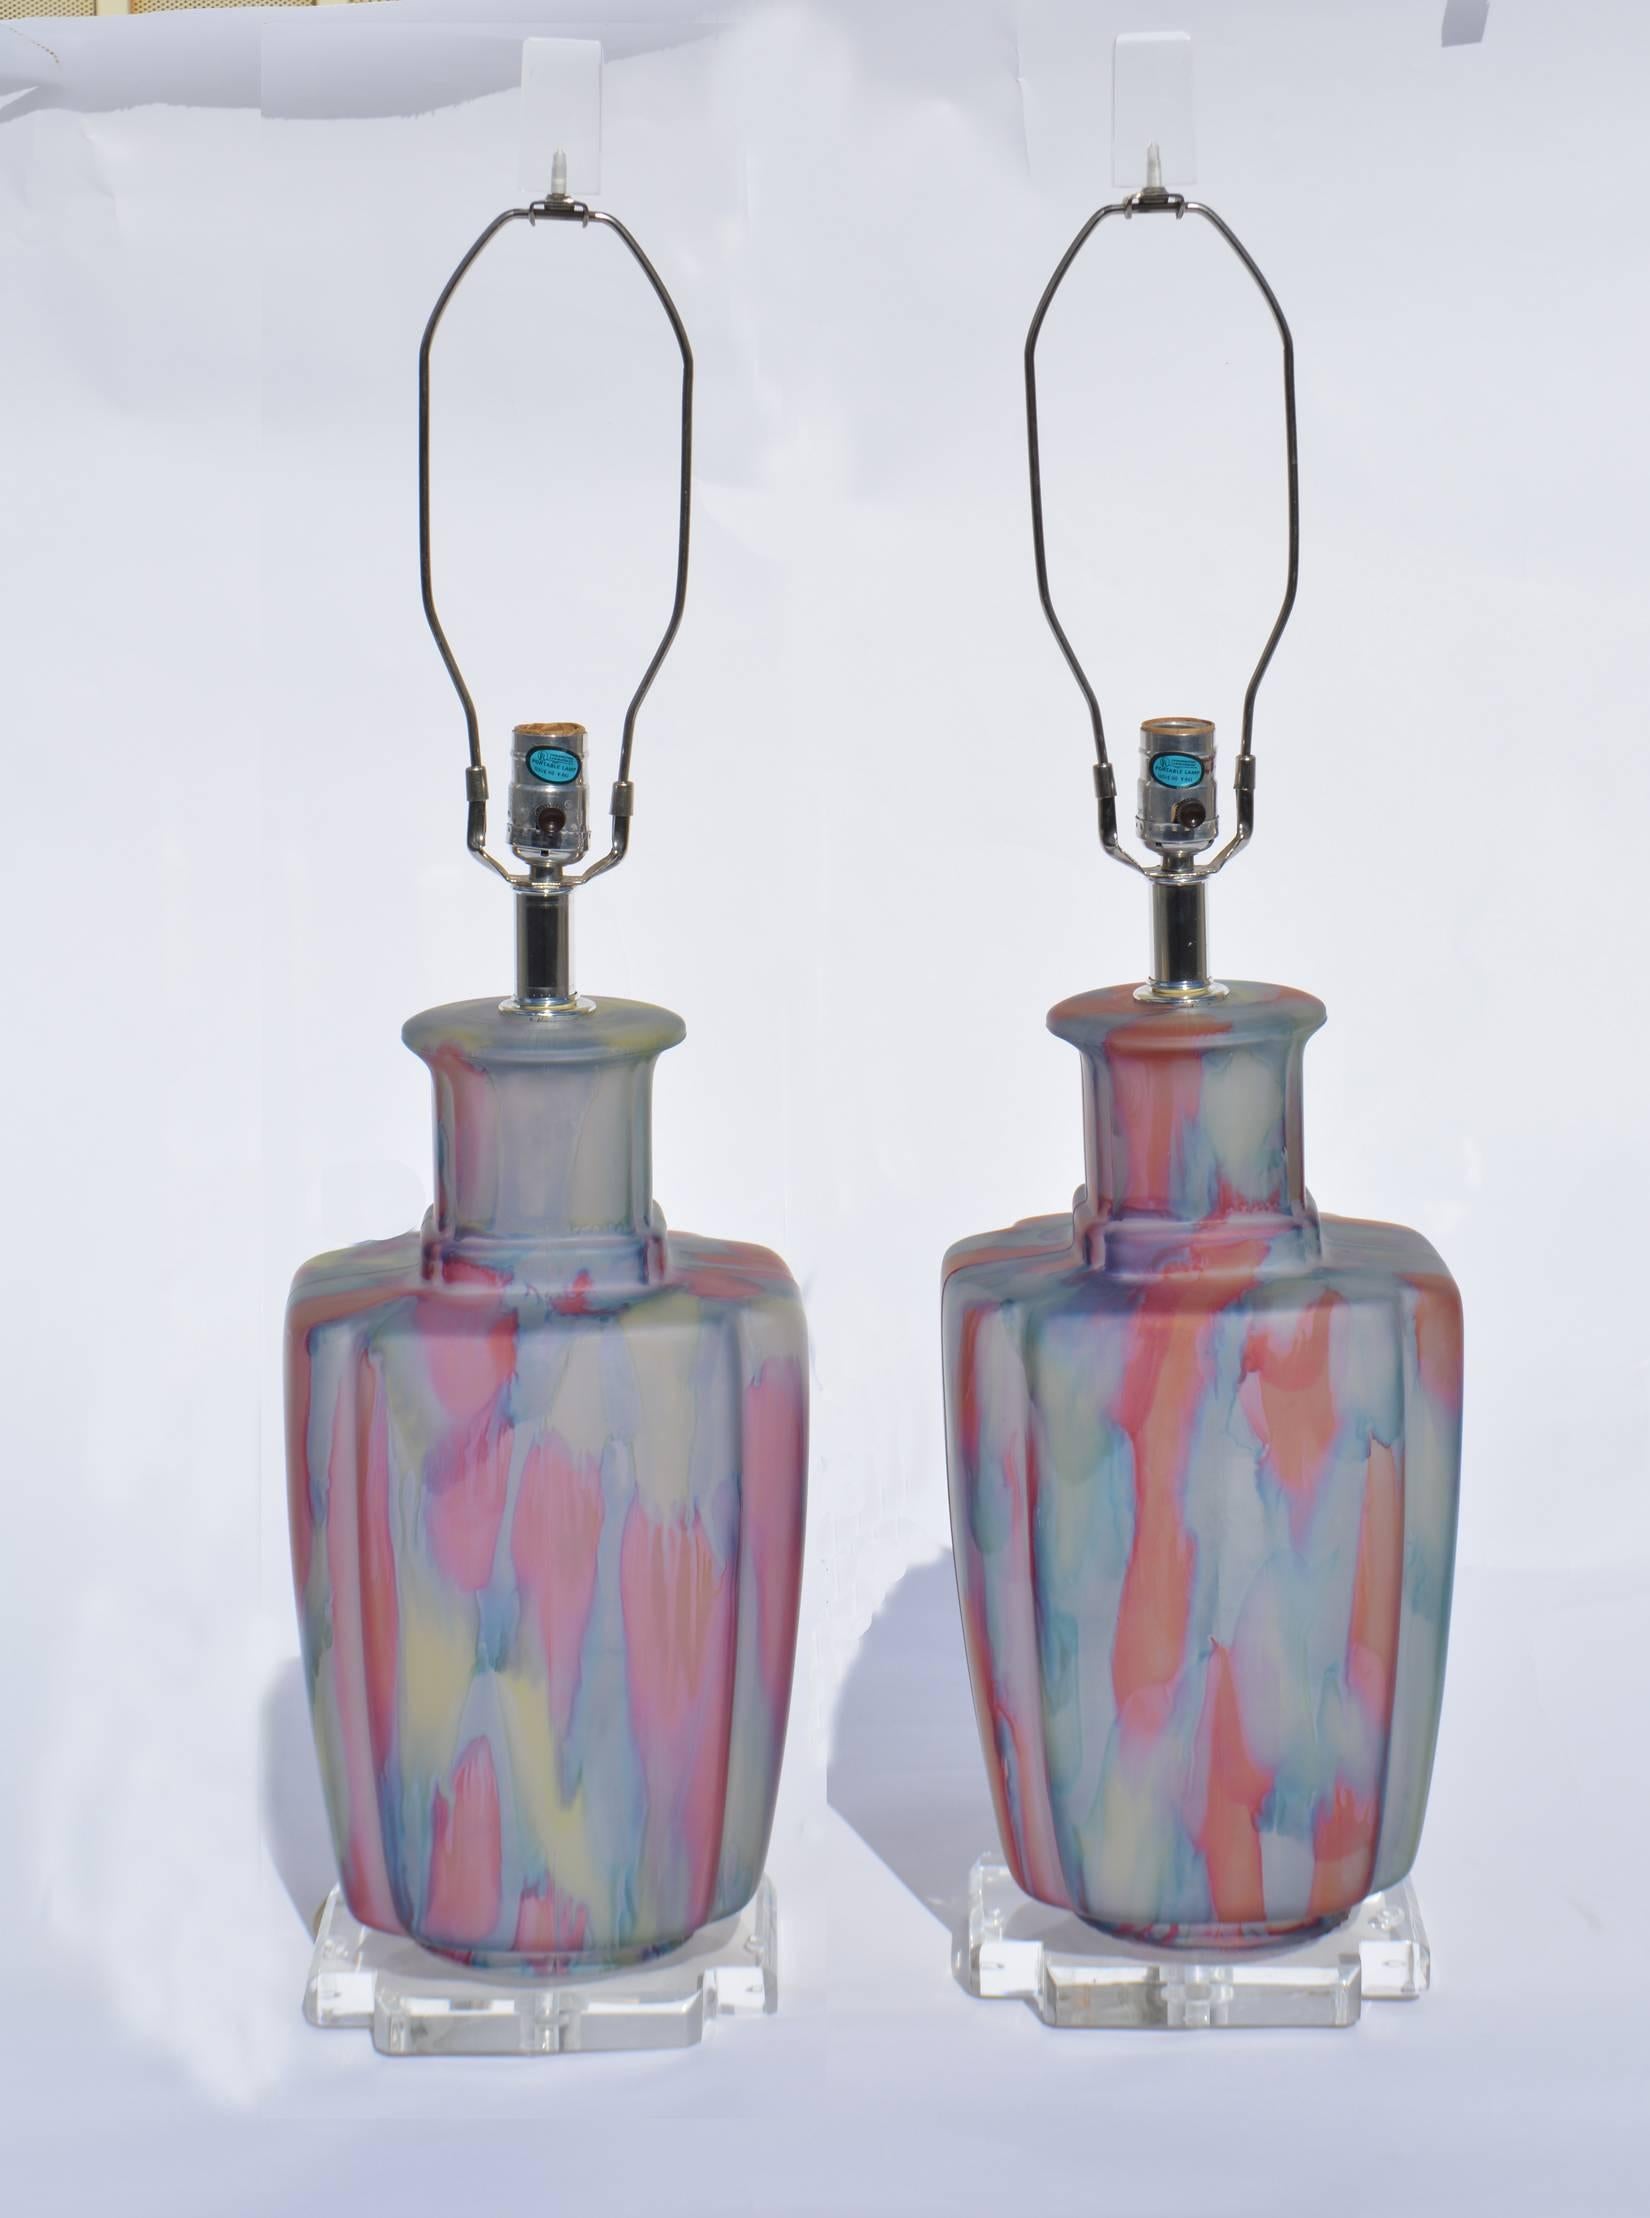 Unique pair of frosted glass Bauer lamps in tones of blue and pale pink with Lucite bases and finials. Internally lit and newly rewired with three-way sockets, American, circa 1980s.